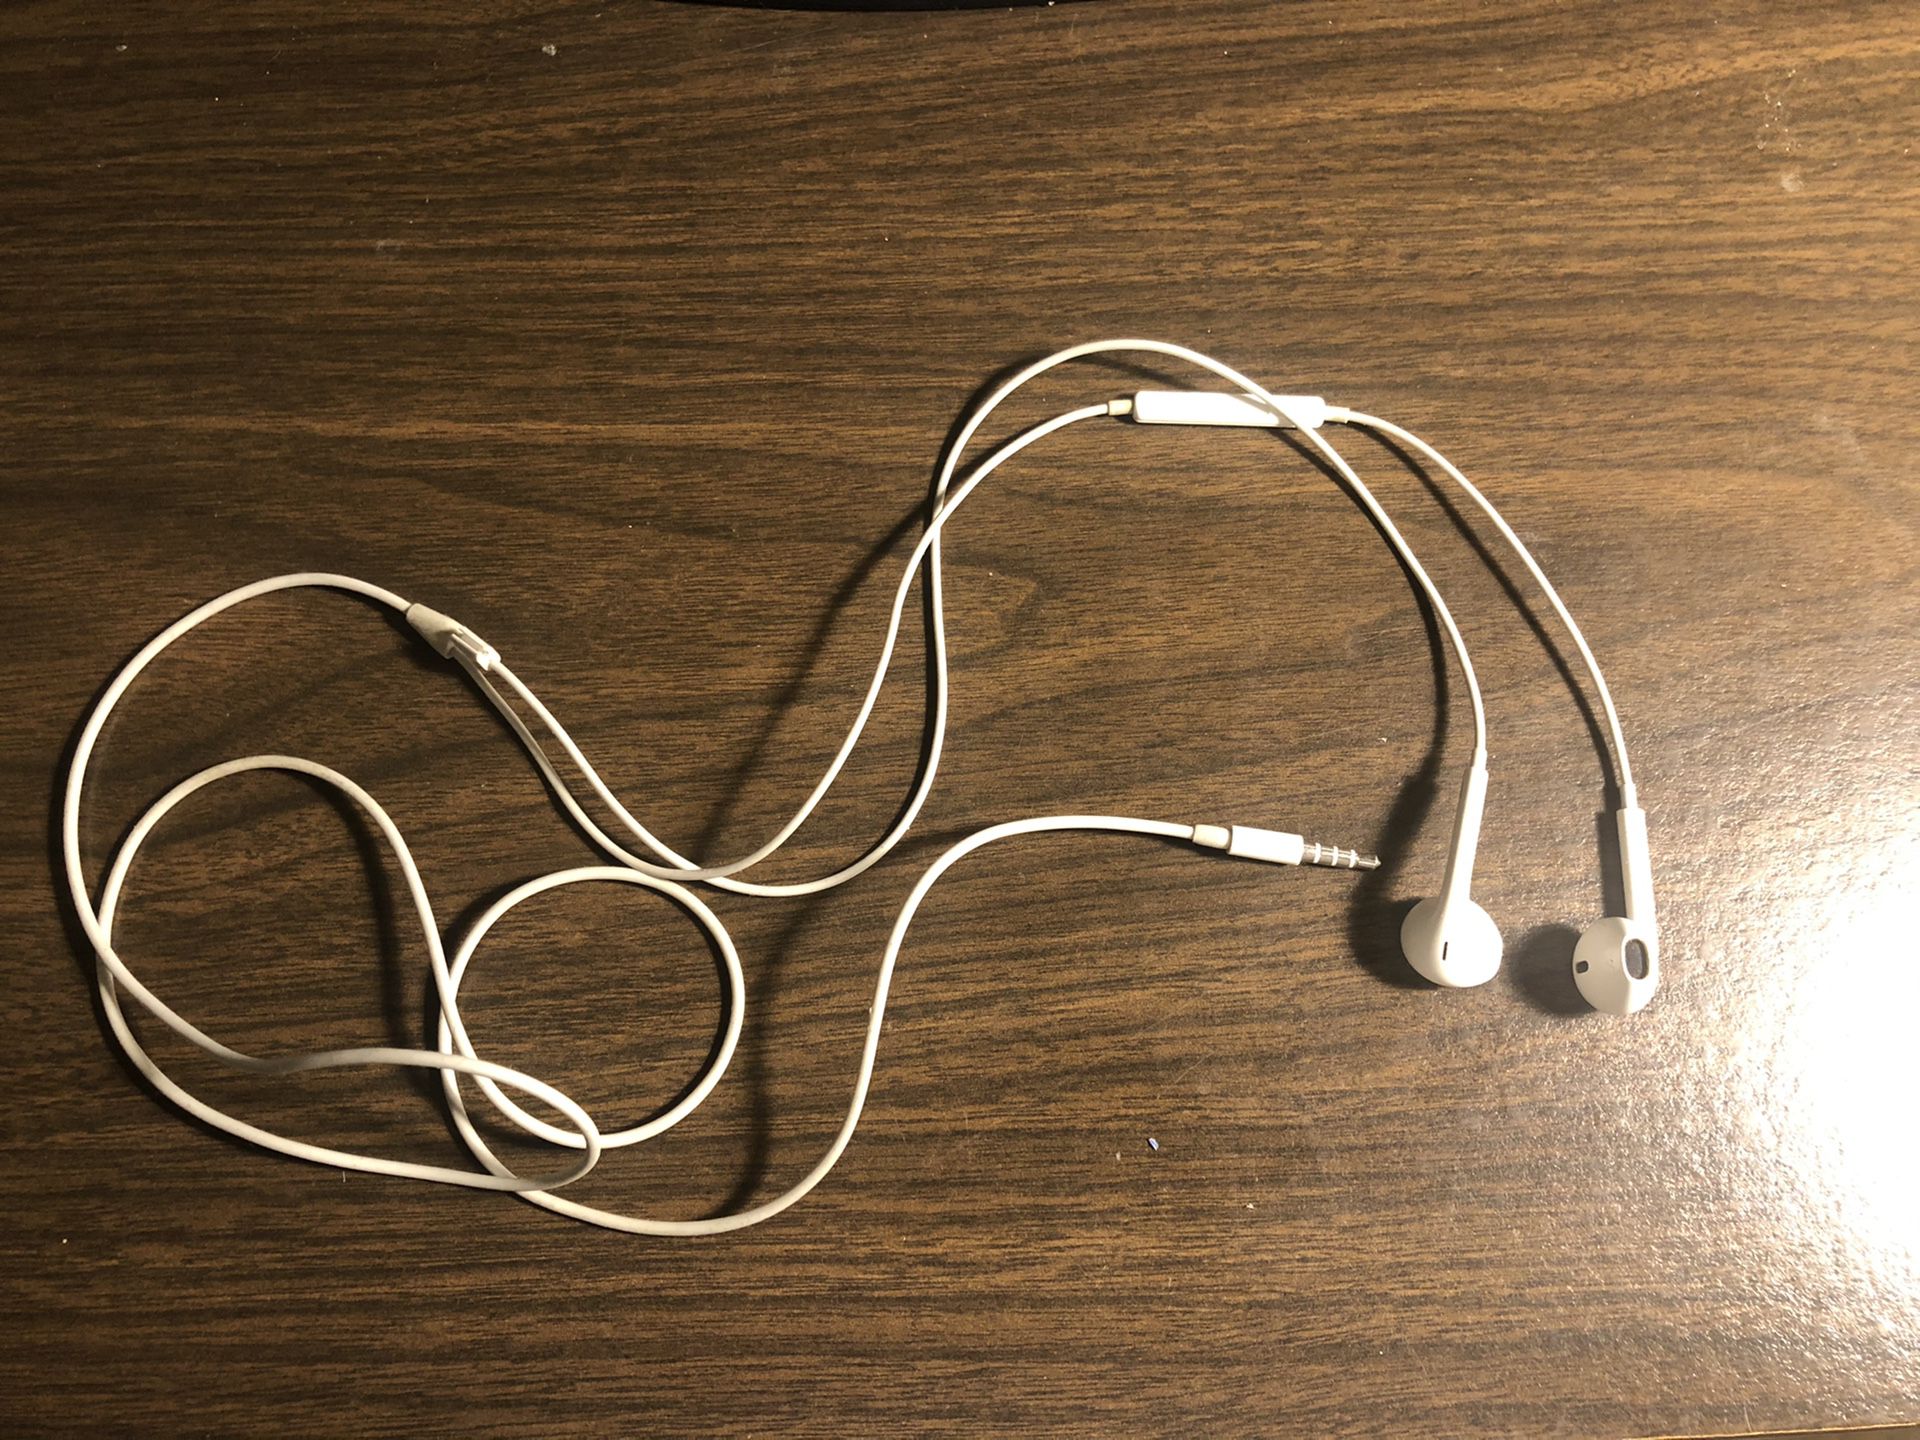 Apple Earbuds with mic and volume control